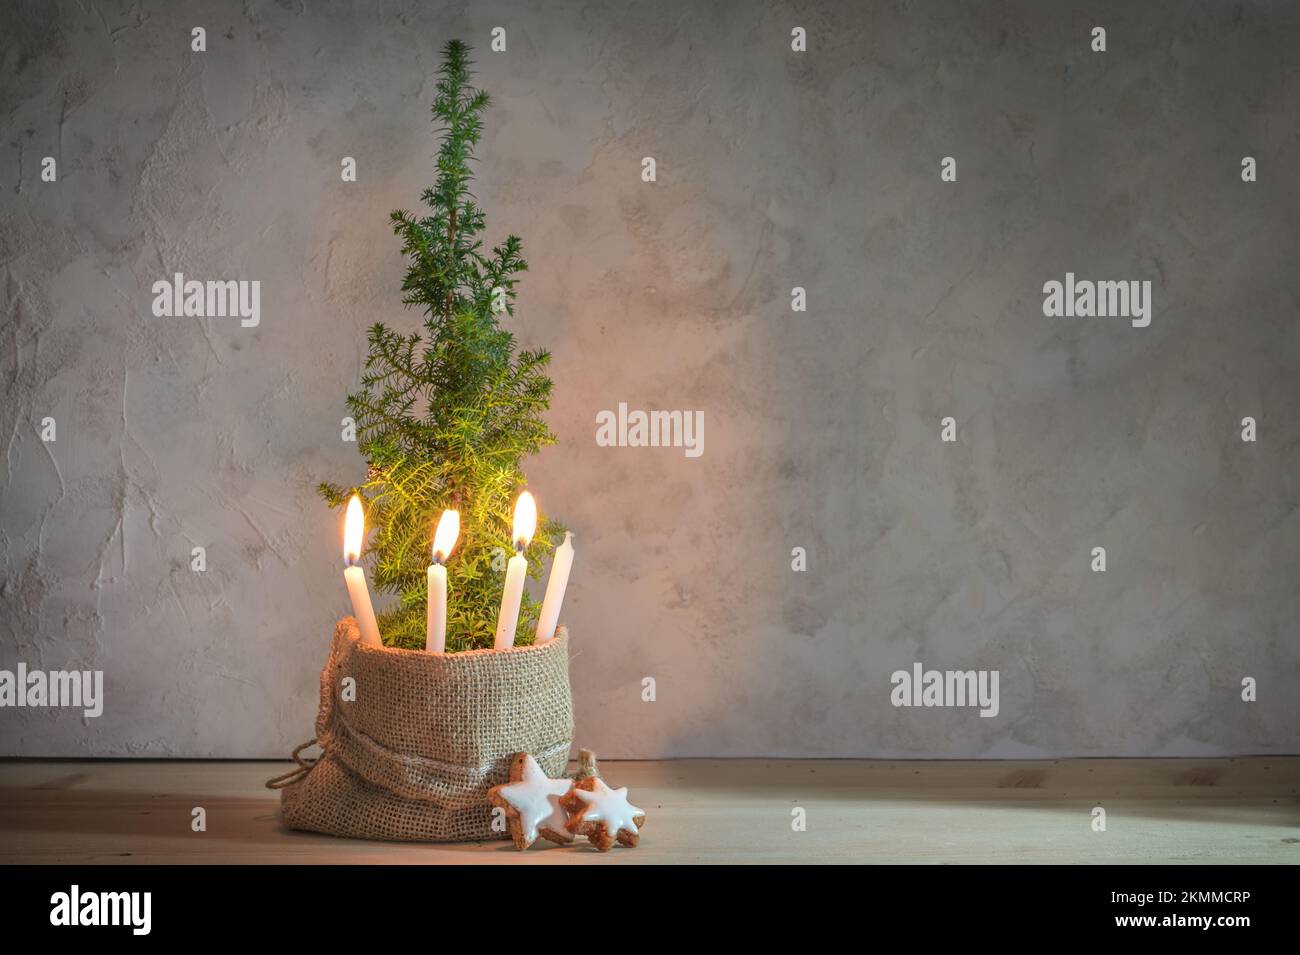 Alternative Advent wreath, three candles lit with a flame on a small conifer plant as Christmas tree symbol, large copy space Stock Photo